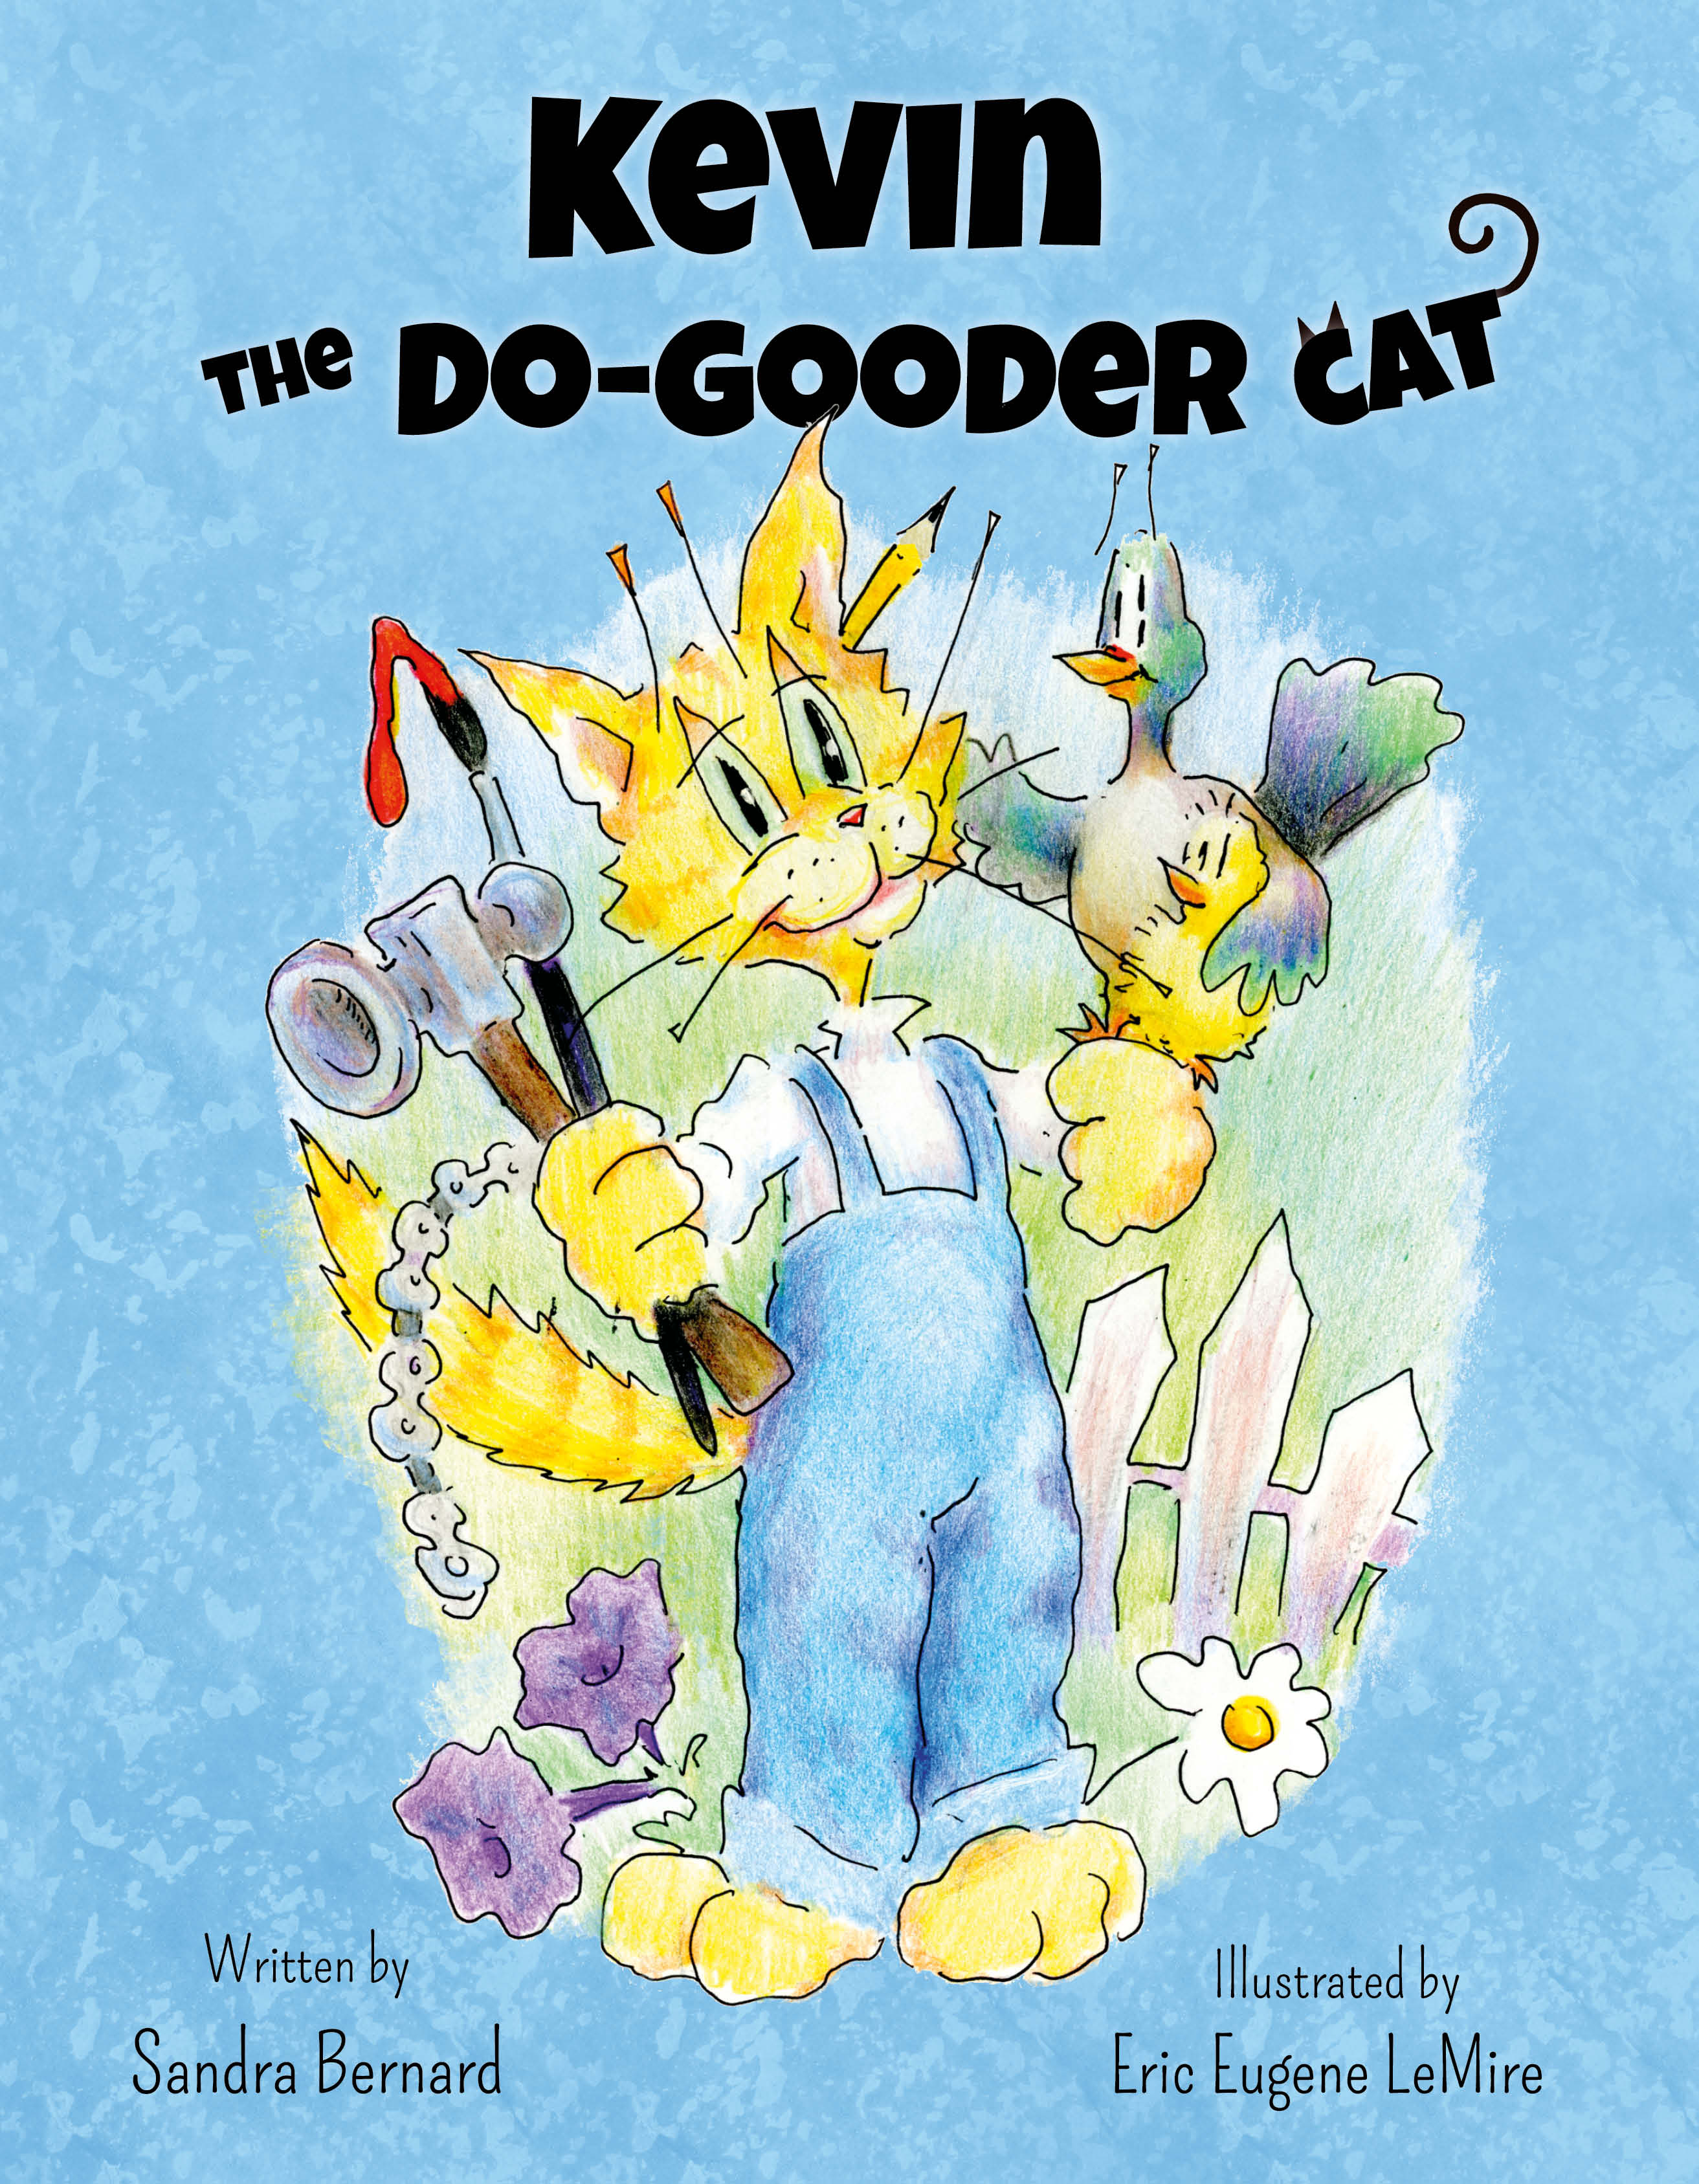 Kevin the Do-Gooder Cat